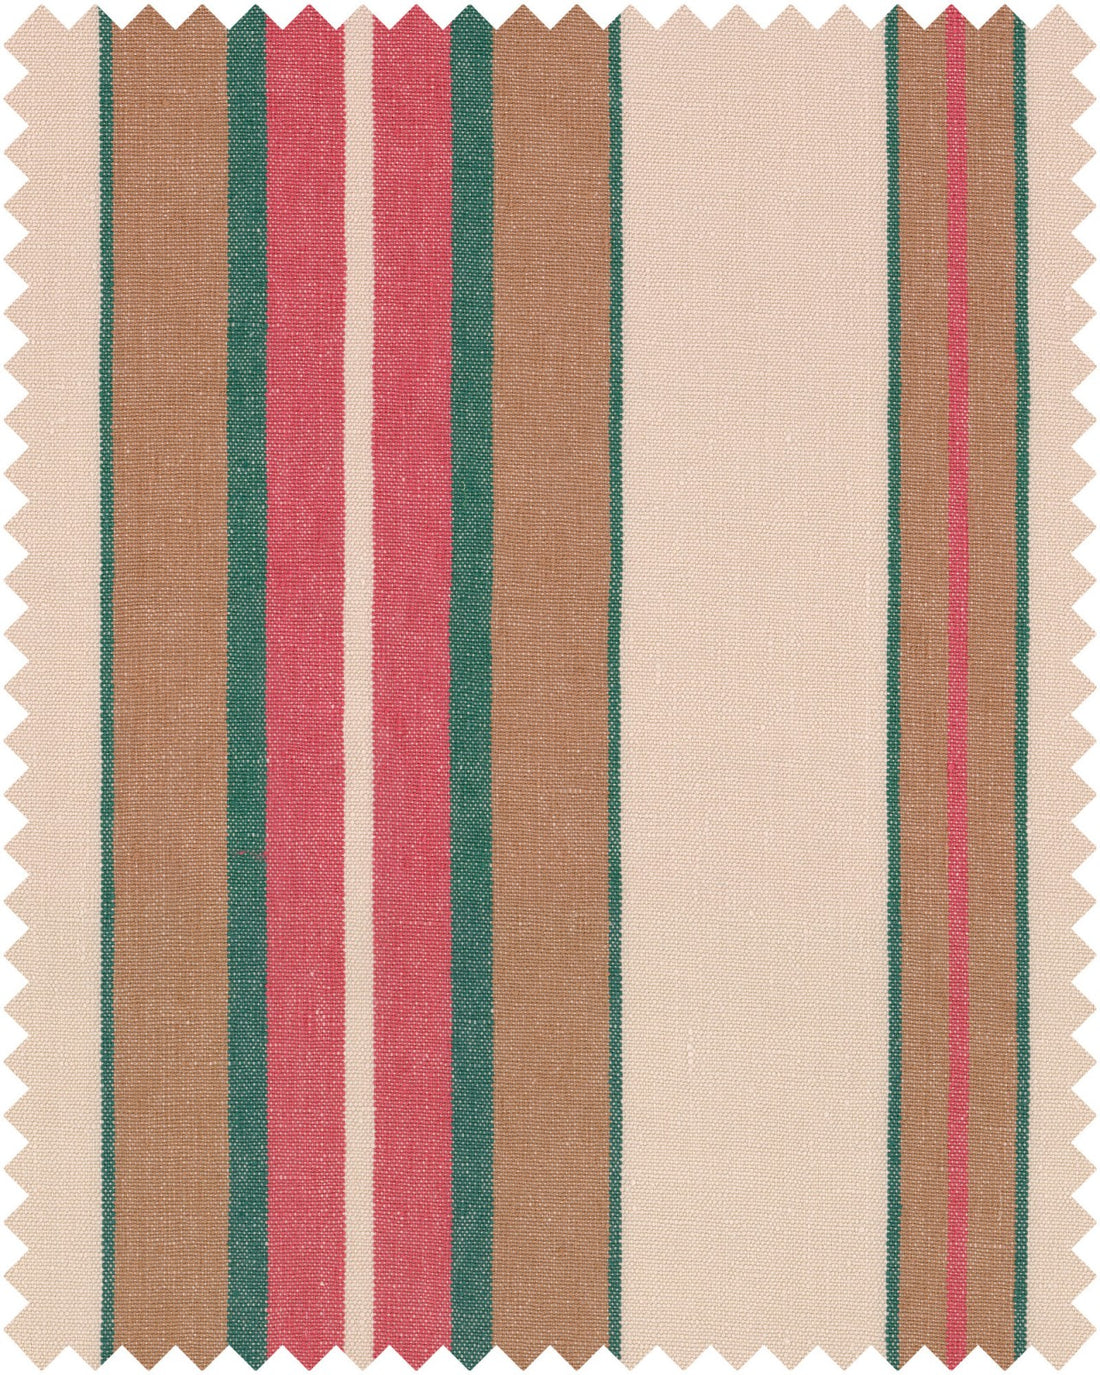 Herina Stripe Heavy Linen fabric in green red brown white color - pattern number FB00056 - by Mind The Gap in the Transylvanian Roots collection